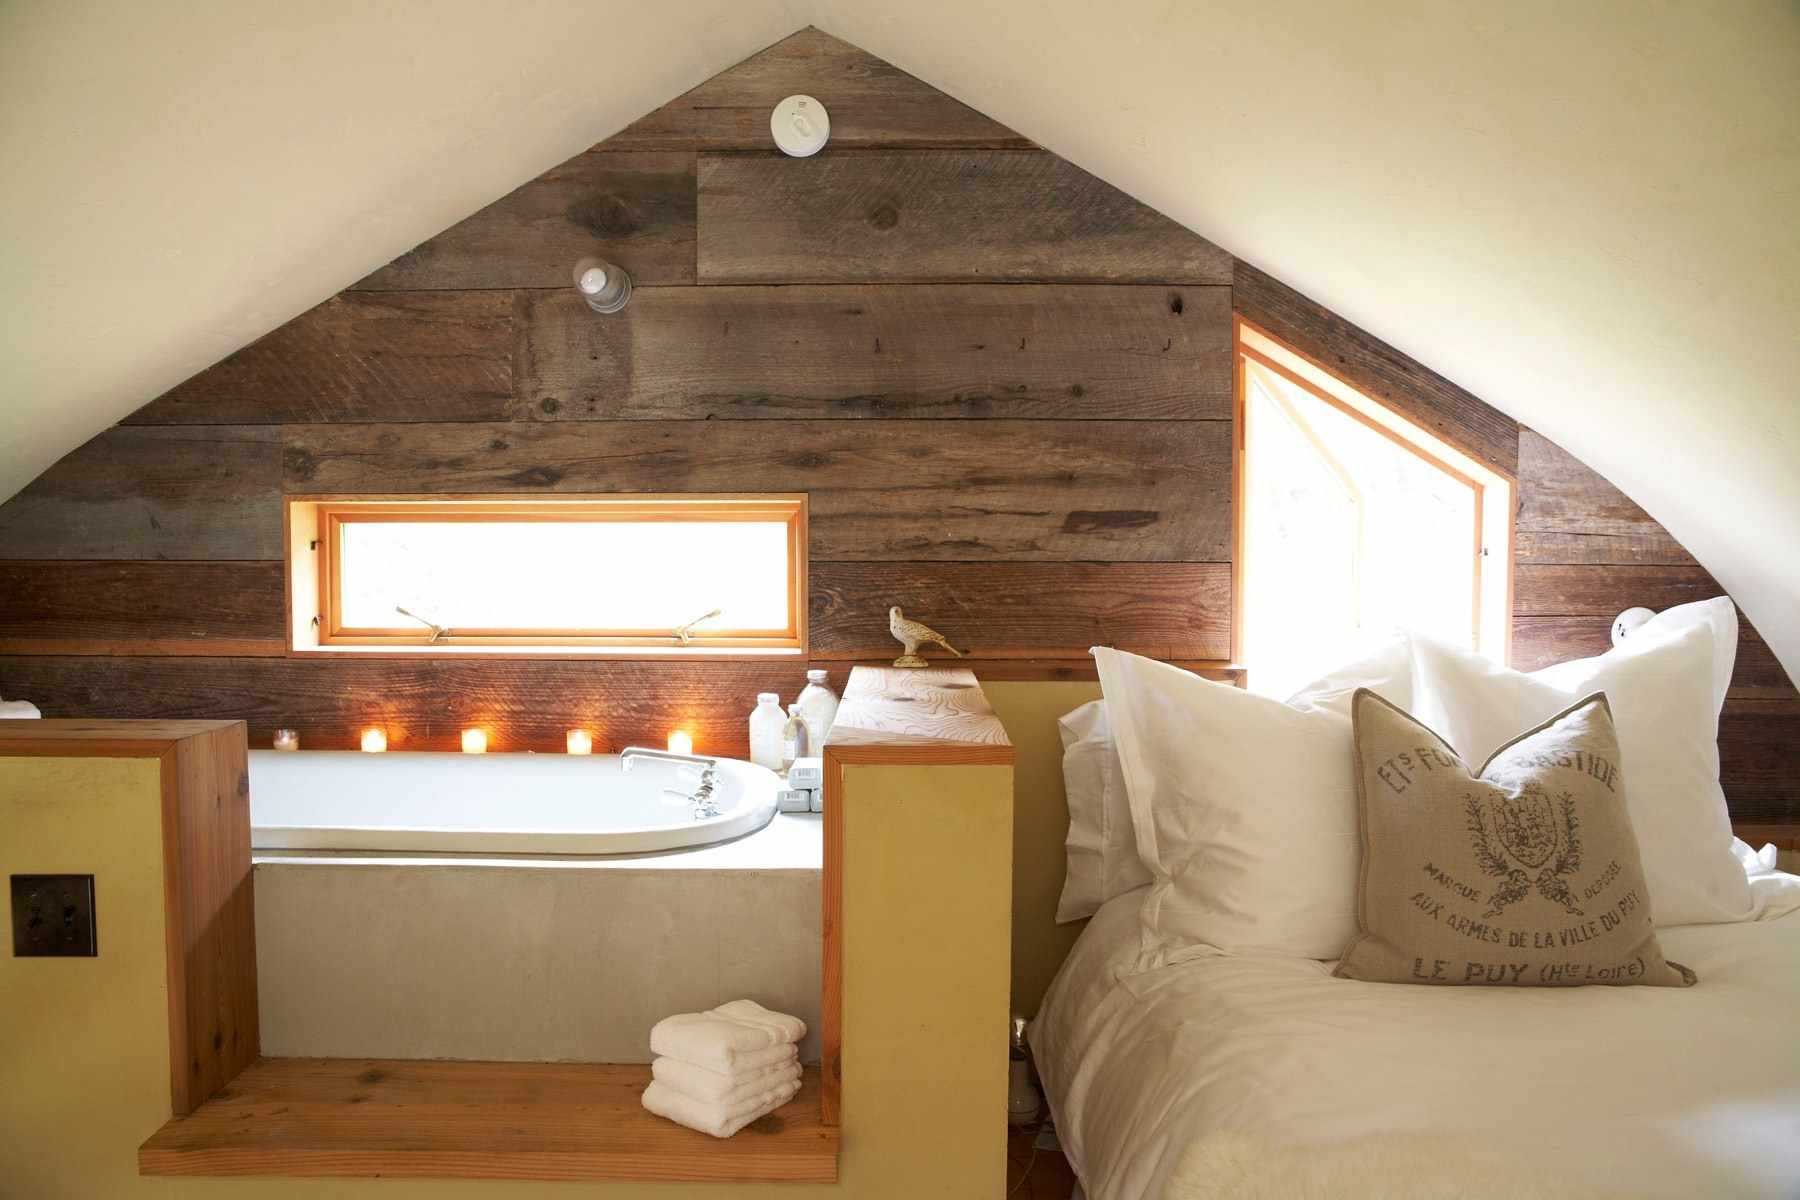 variant of the unusual style of the attic bedroom